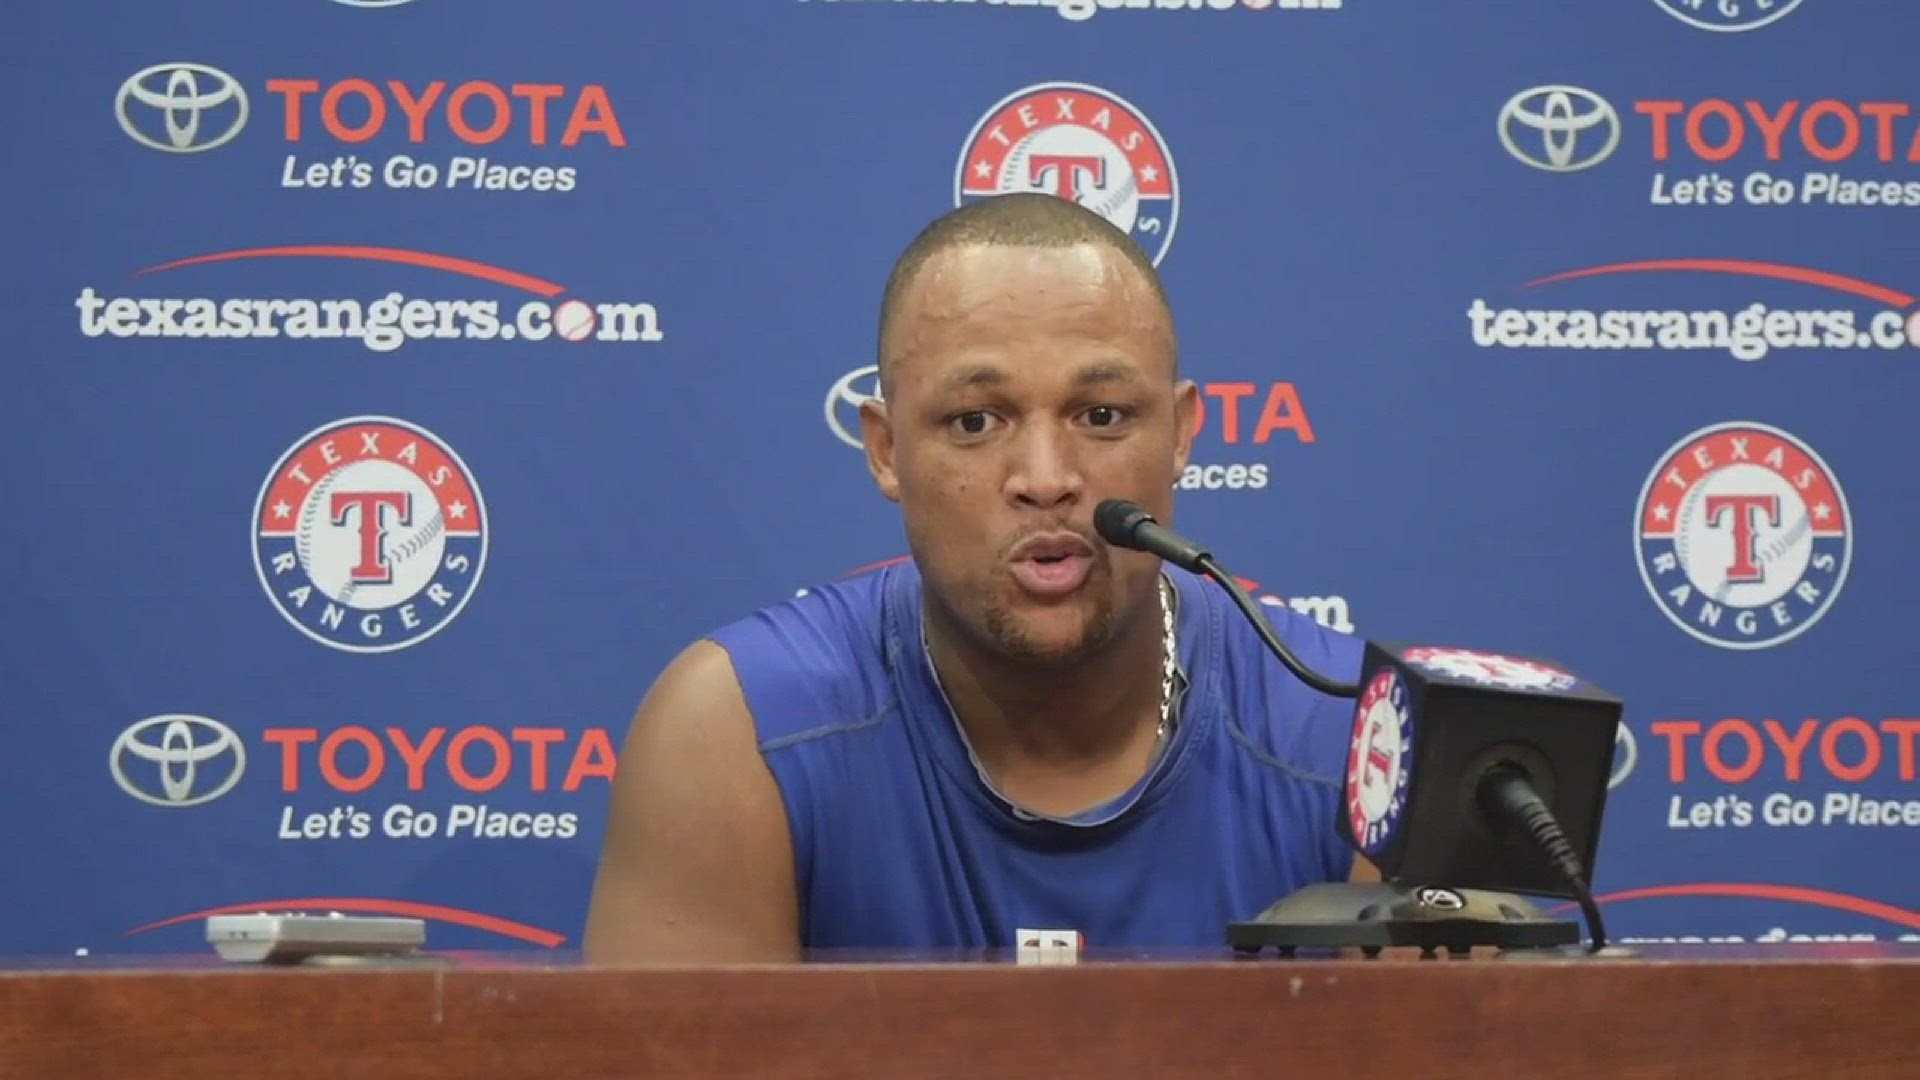 Adrian Beltre tells us what it felt like to get his 3,000th hit